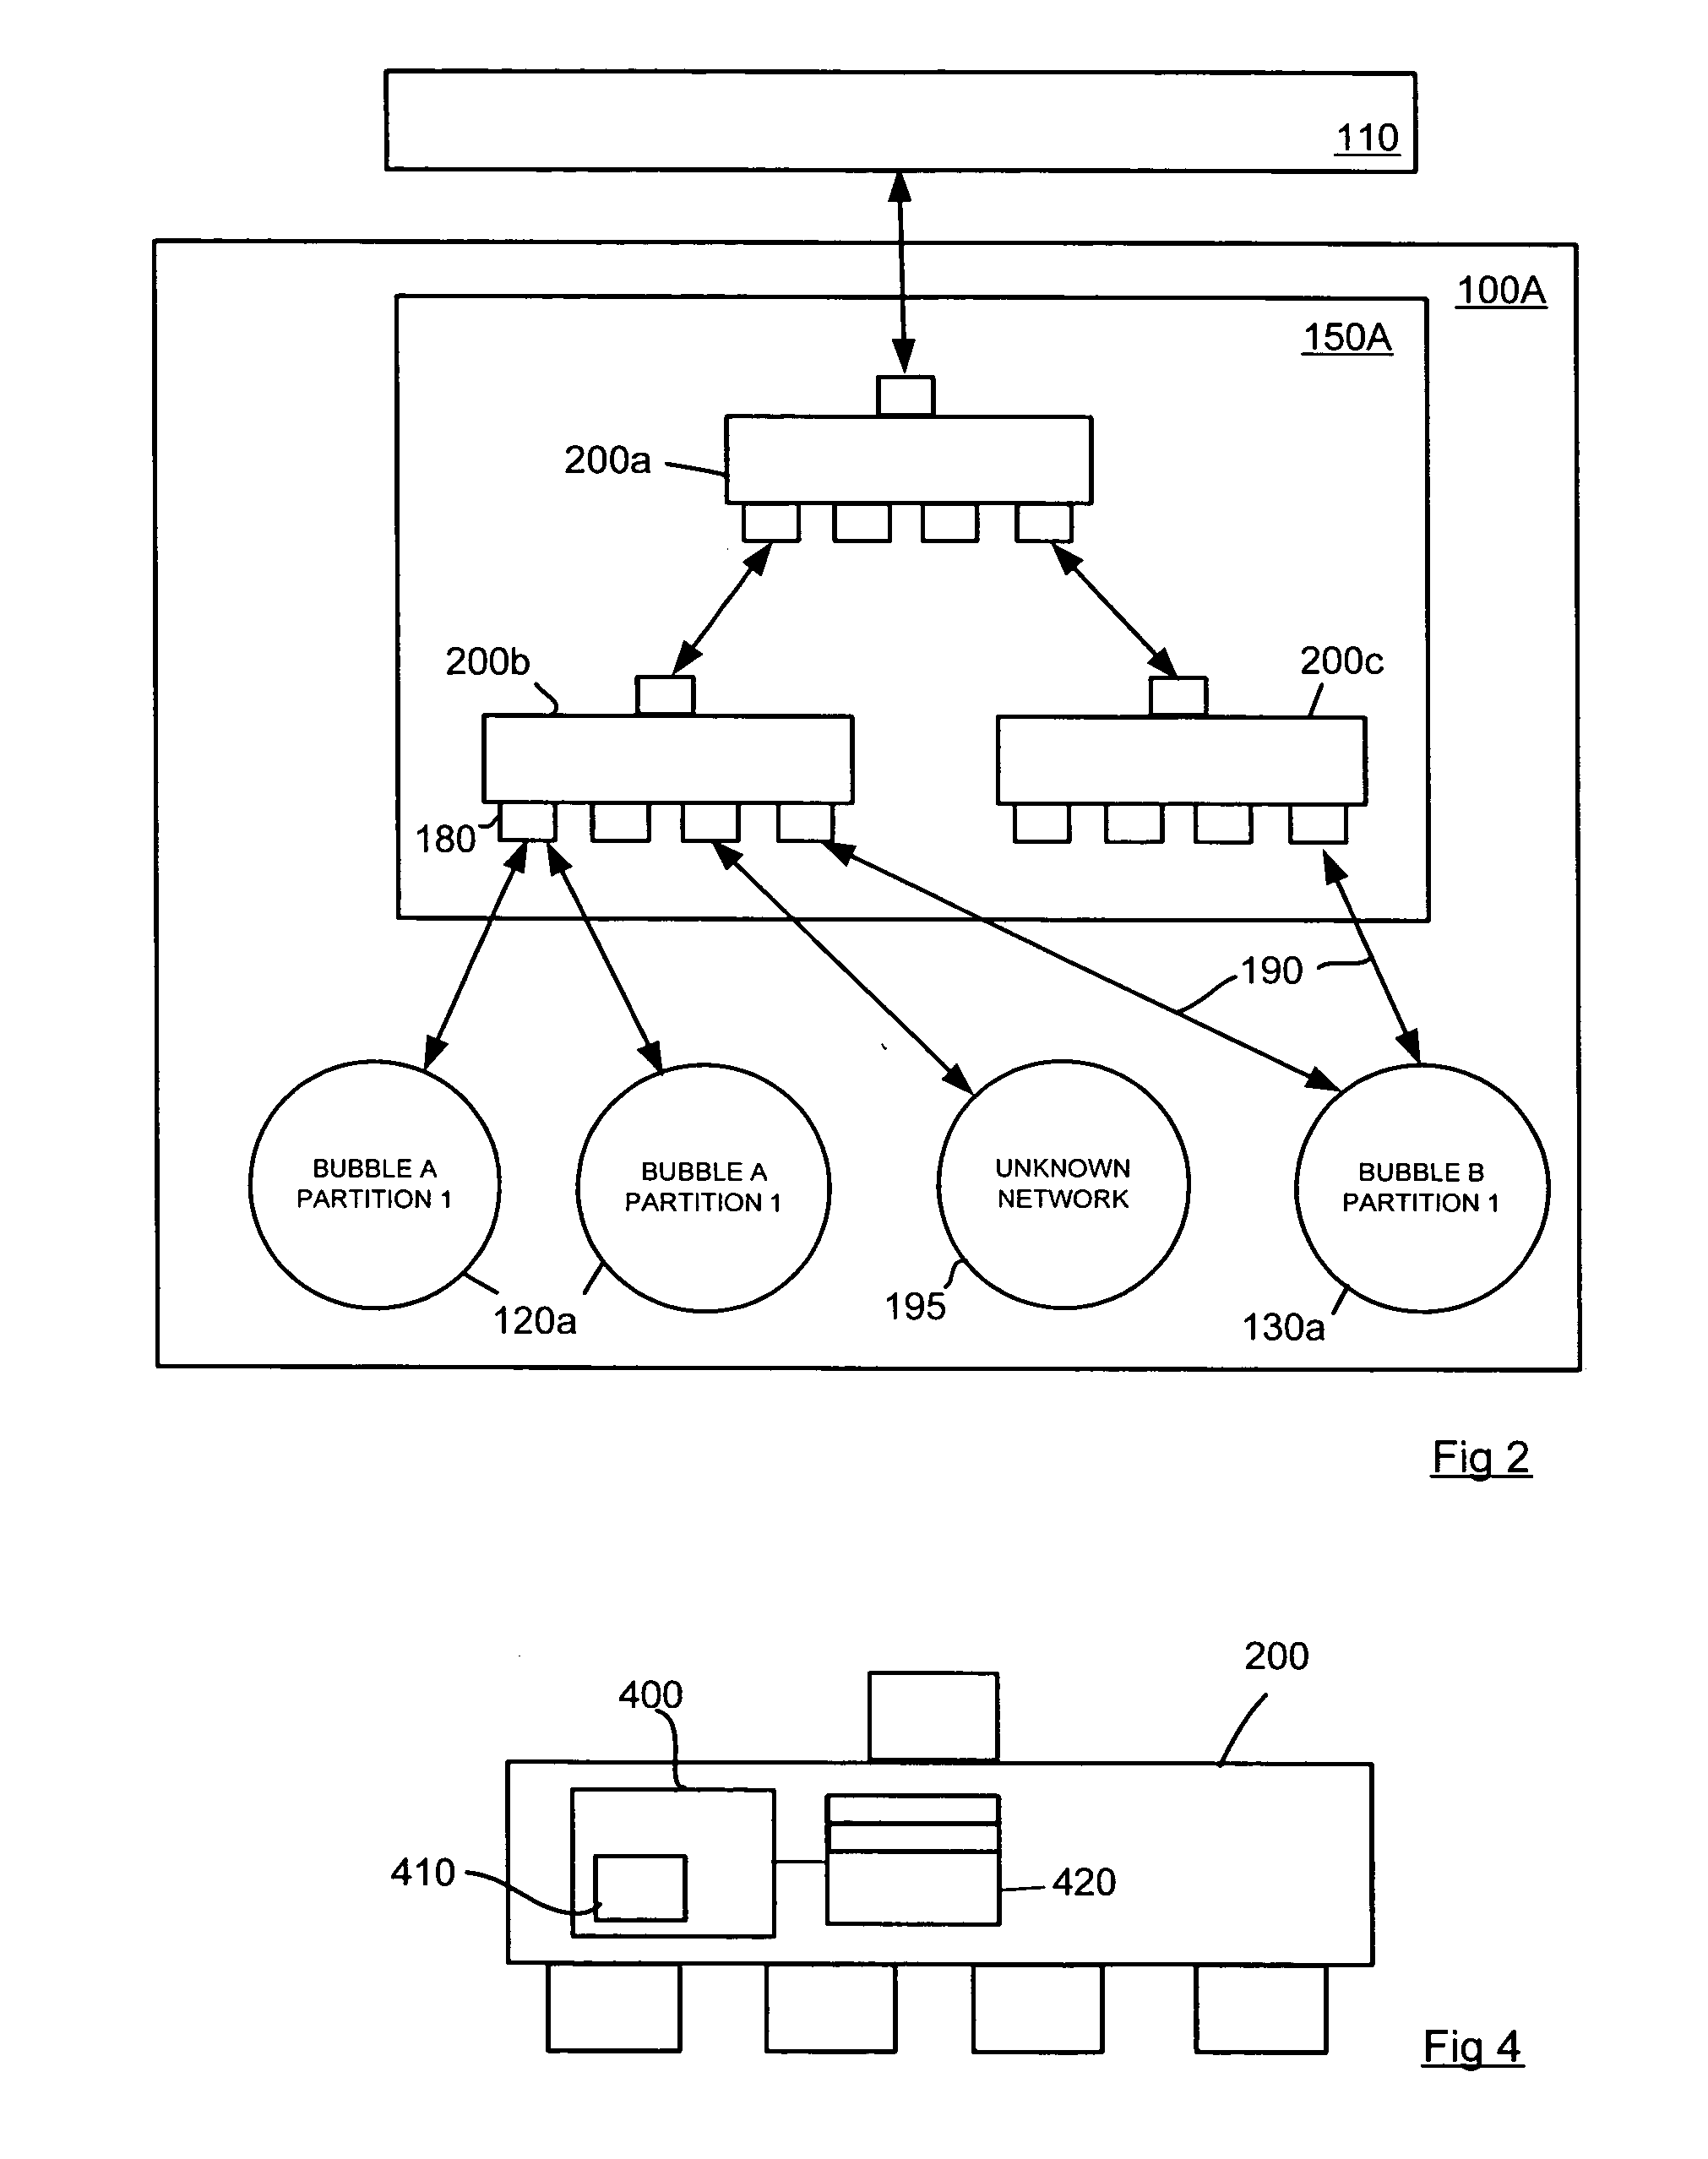 Method and apparatus for implementing security policies in a network